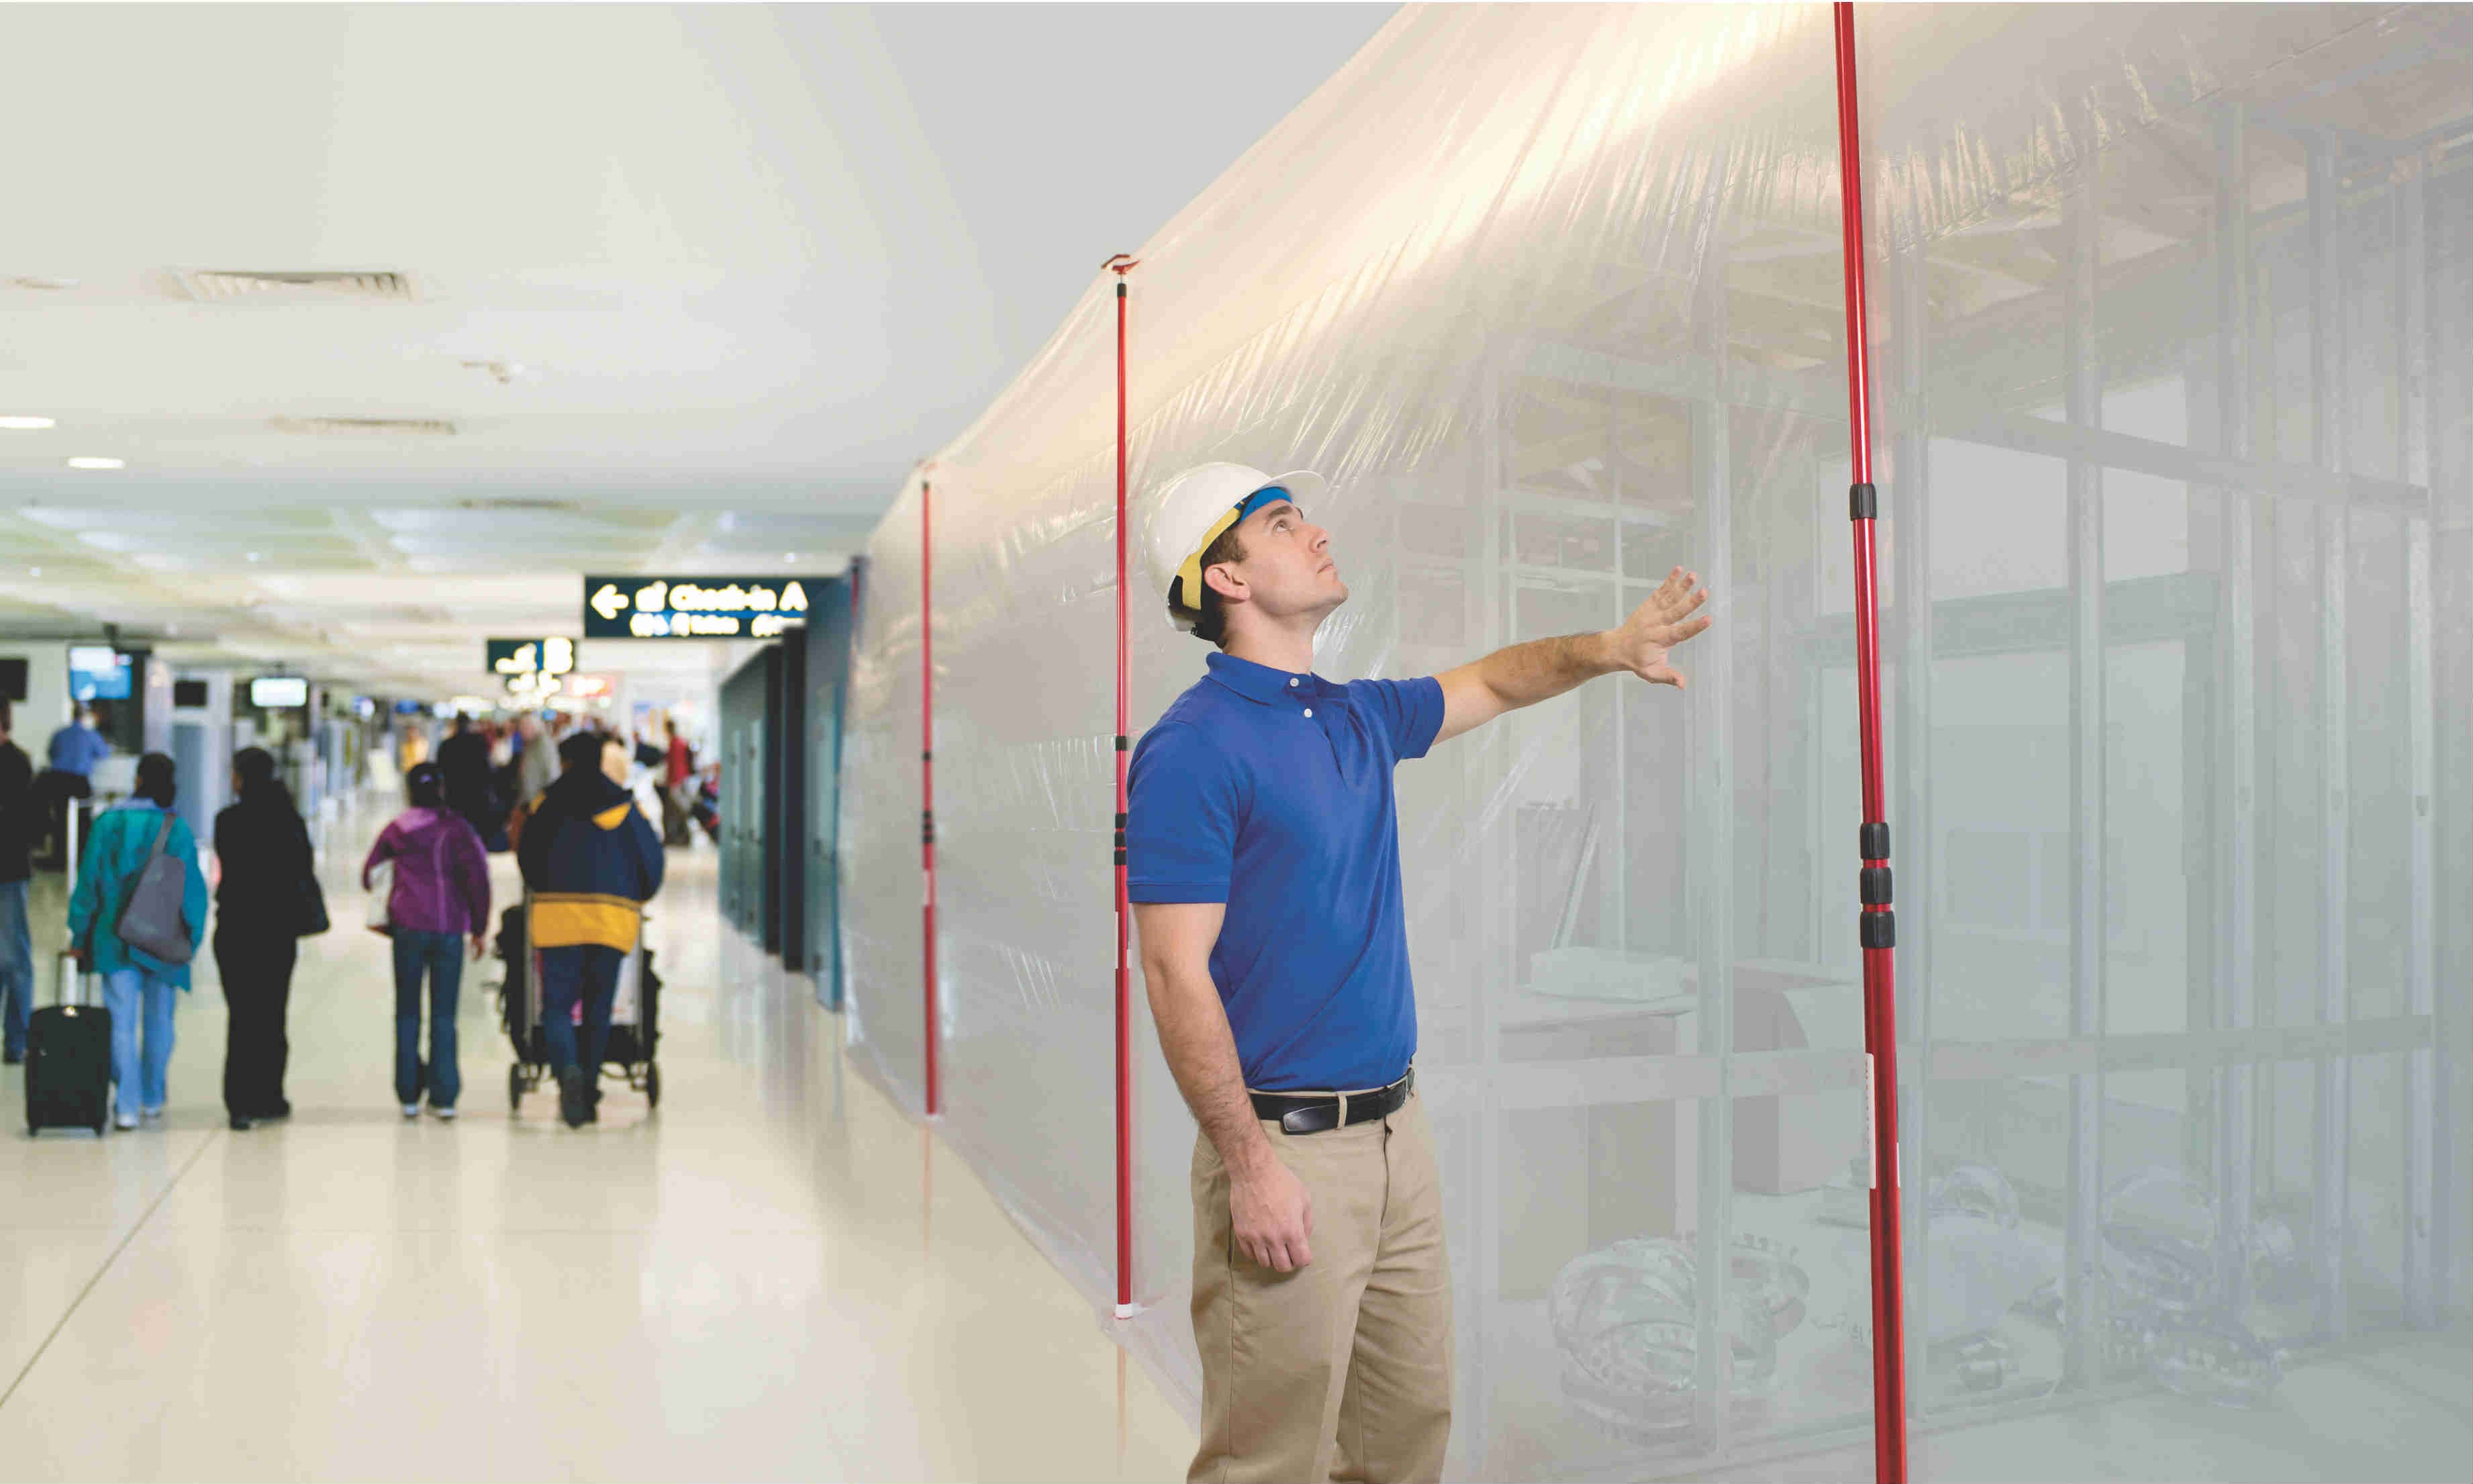 Quick and easy dust protection onsite with the Zipwall® dust barrier system